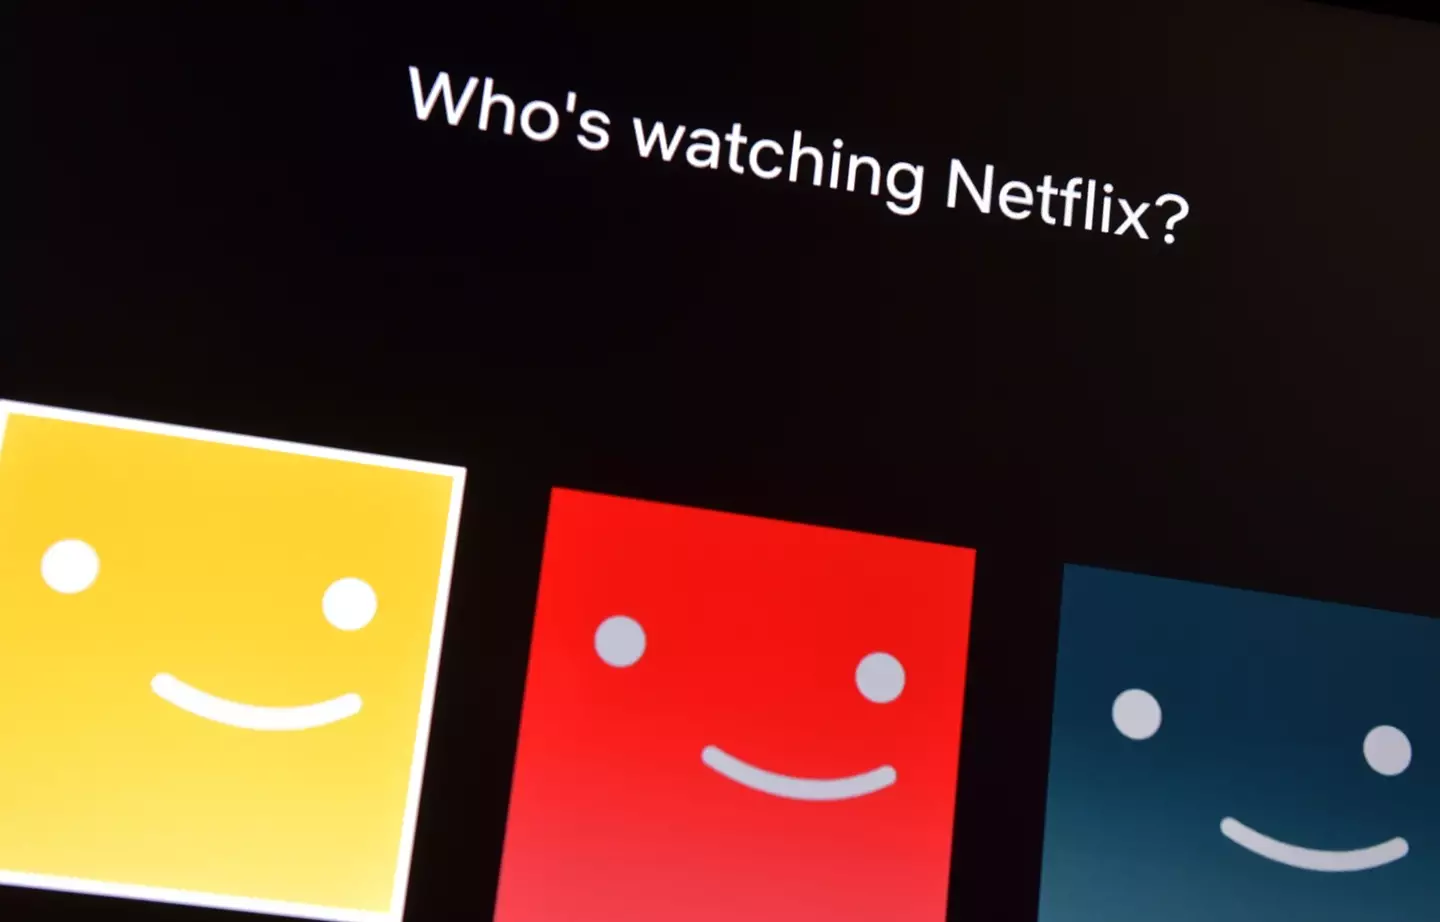 We all have our personal favourites when it comes to Netflix.